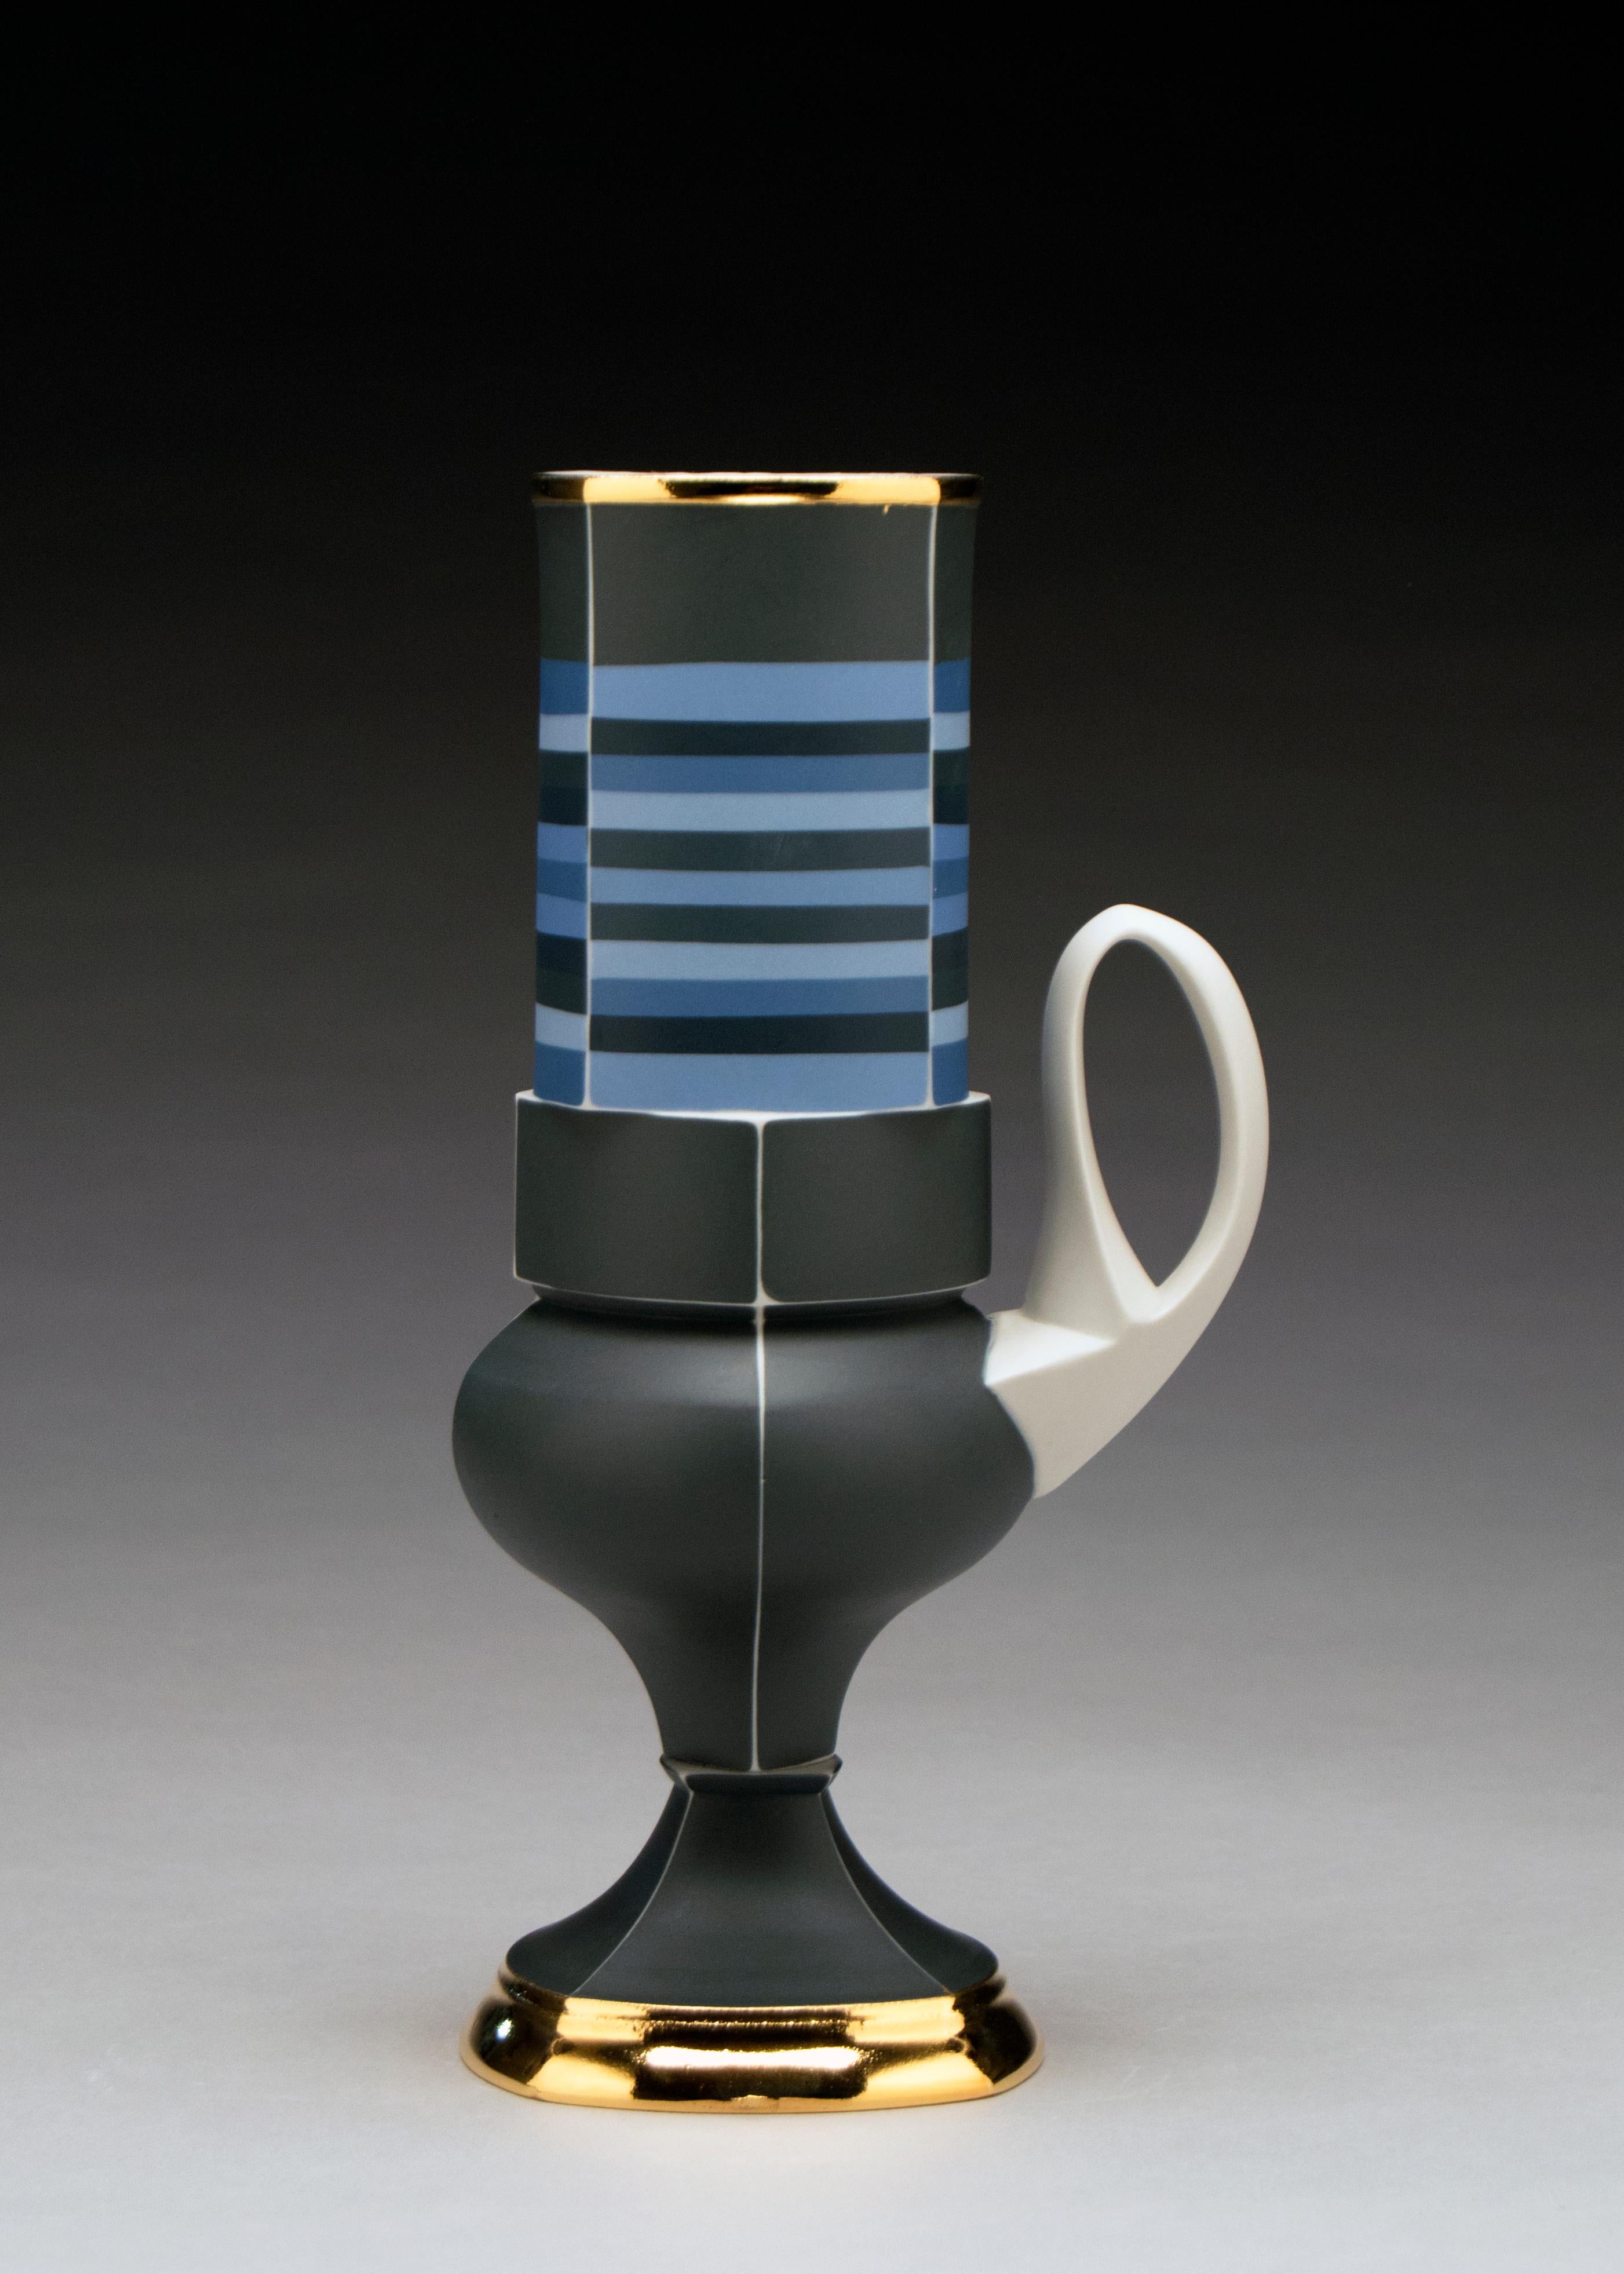 Contemporary Design, Porcelain Cup with Gold Luster Glaze and Geometric Pattern - Sculpture by Peter Pincus